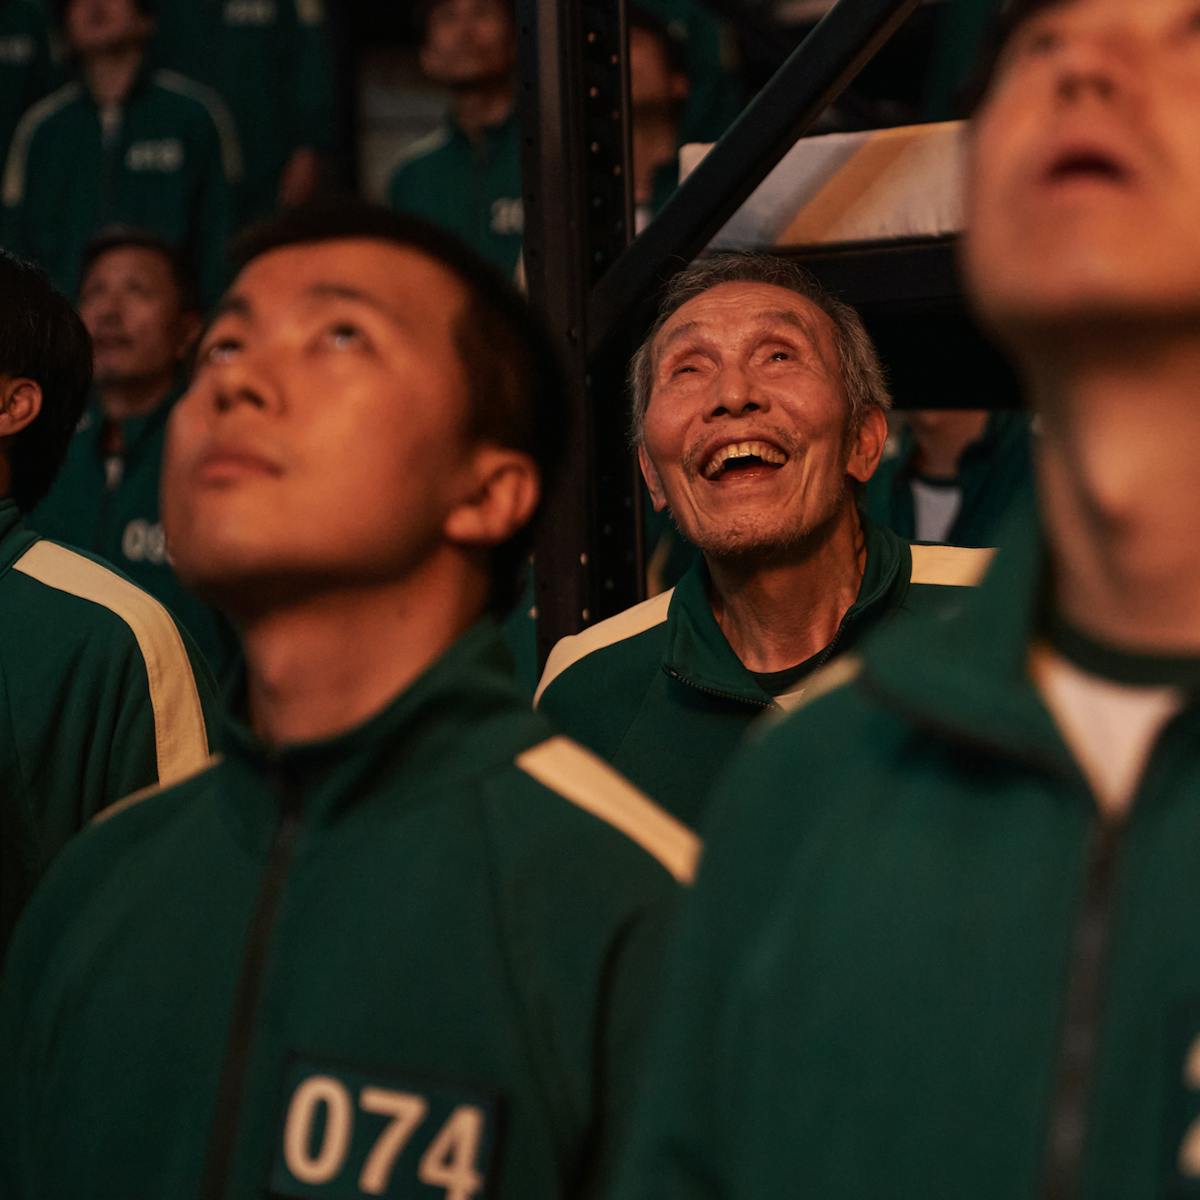 Oh Il-nam (Oh Young-soo) looks up in awe alongside other players in green tracksuits.